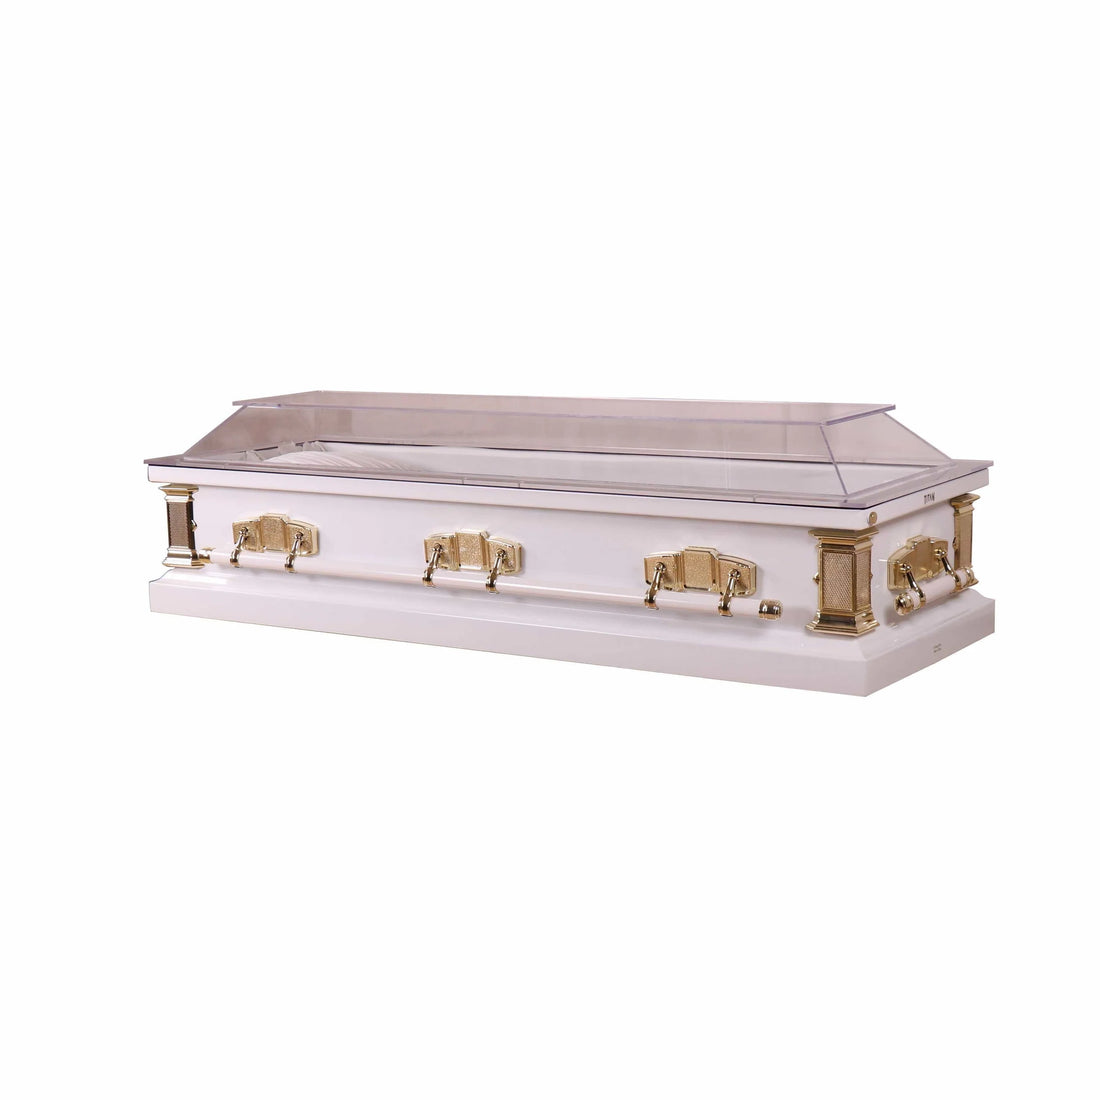 What Is The Cost Of A See Through Casket?